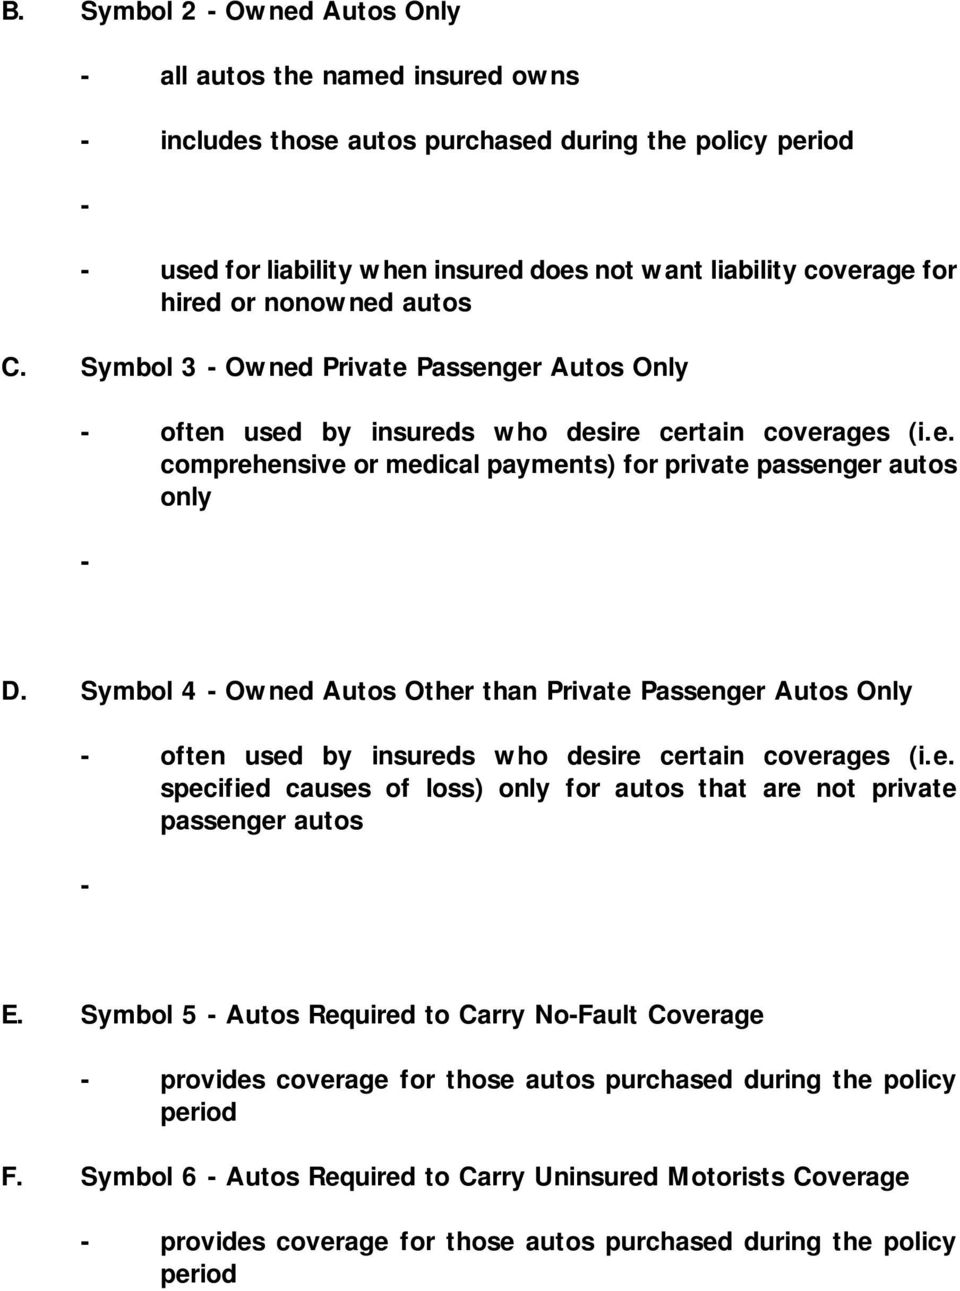 Symbol 4 Owned Autos Other than Private Passenger Autos Only often used by insureds who desire certain coverages (i.e. specified causes of loss) only for autos that are not private passenger autos E.